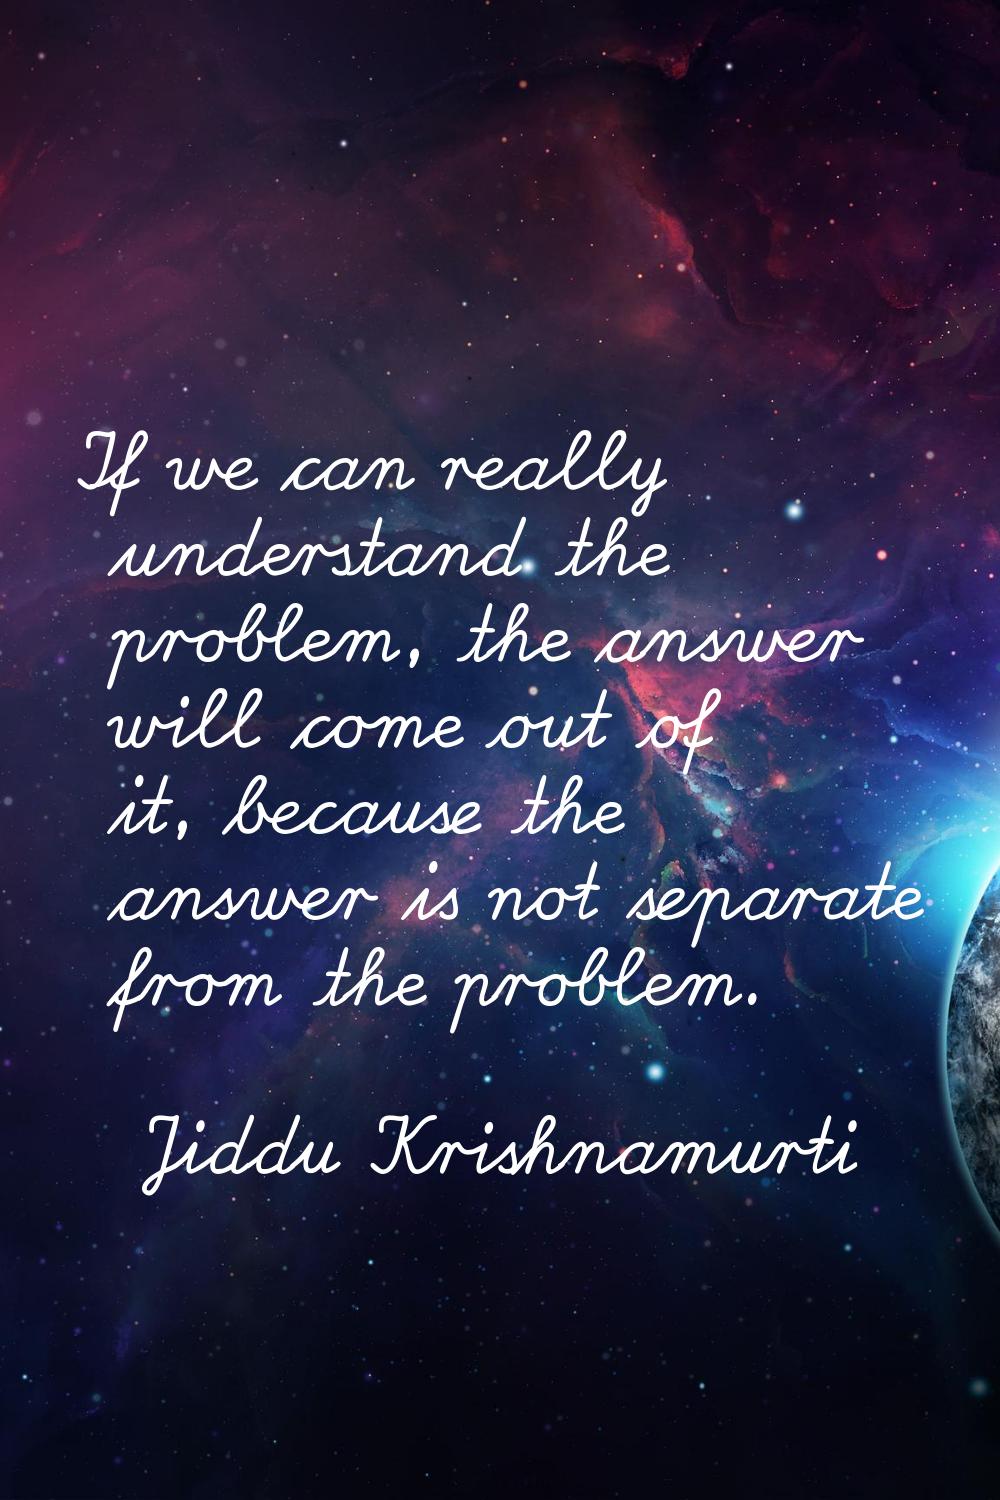 If we can really understand the problem, the answer will come out of it, because the answer is not 